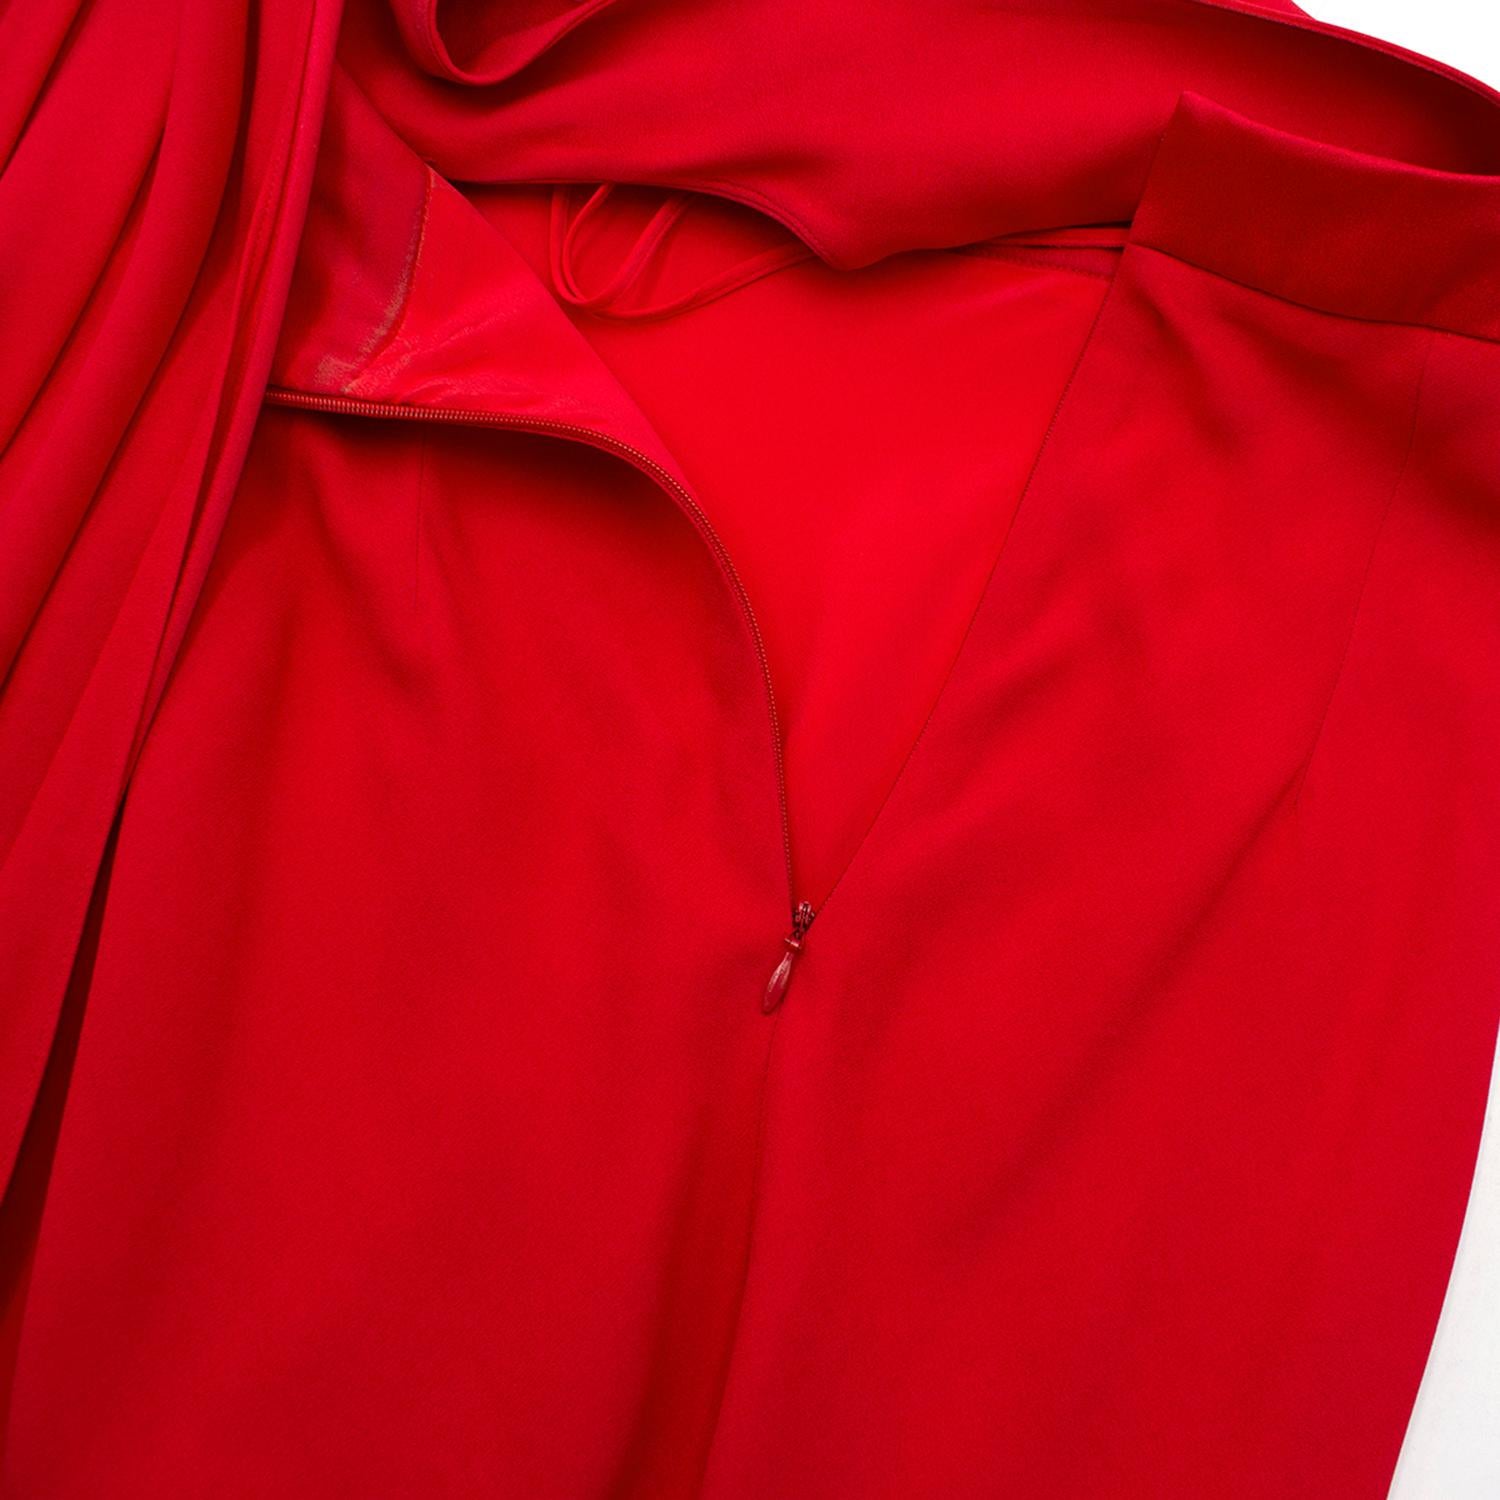 Alexander McQueen Draped Red Open Back Gown  For Sale 3